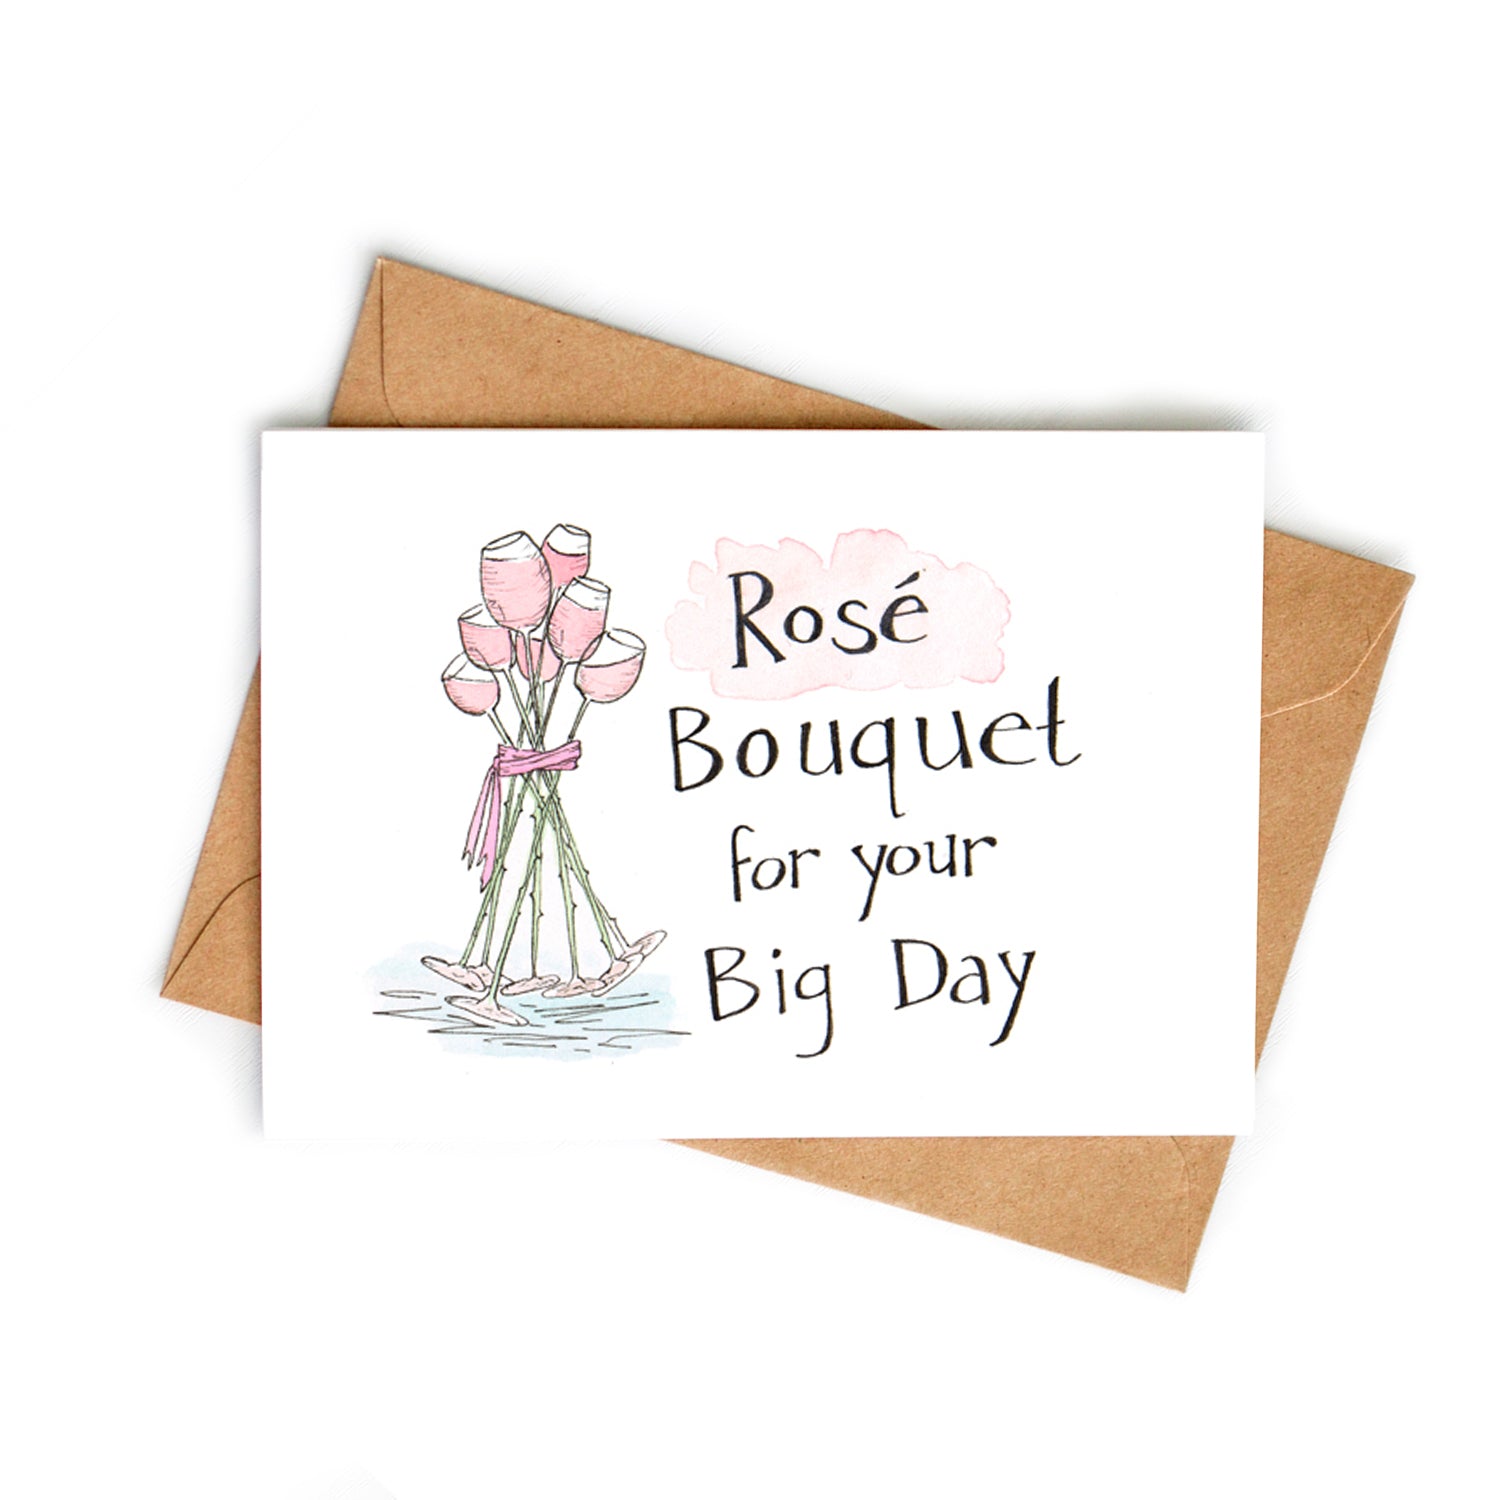 Image of a bouquet of glasses of rosé wine that are tied together with a pink ribbon. The words, "Rosé bouquet for your big day" are hand-lettered on the card.